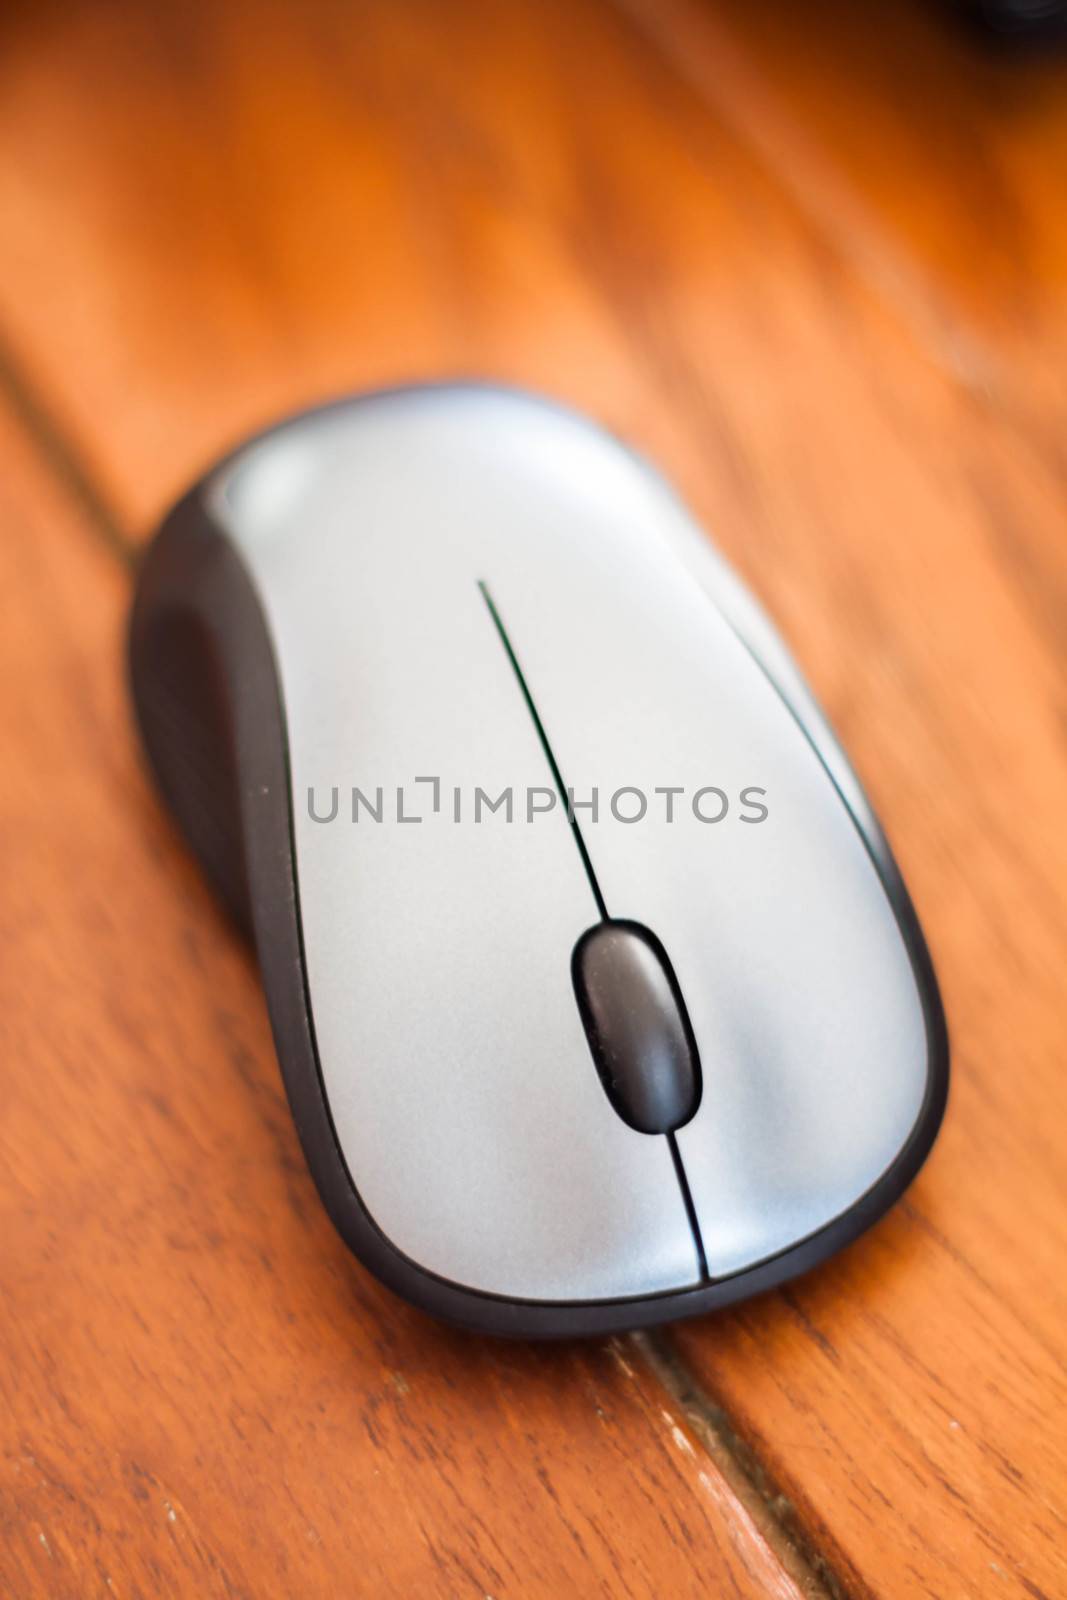 Silver wireless mouse on wood table by punsayaporn